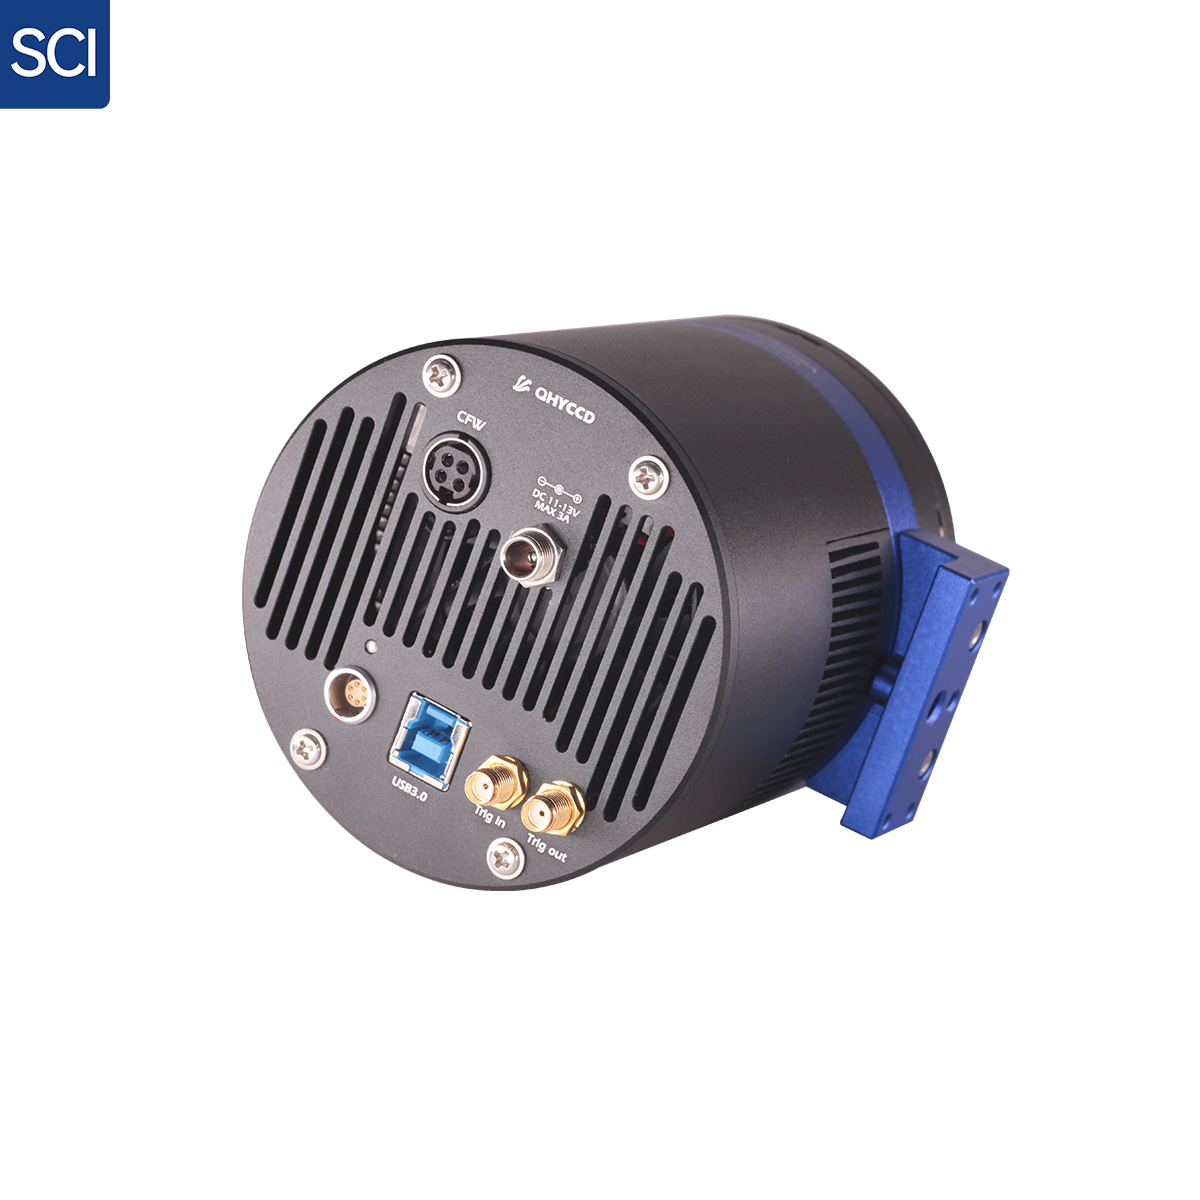 The QHY1920 is a Scientific CMOS camera with a large 12um pixel size. It is ideal for science research and industry in low light. And it has a relatively high QE in the IR Spectra and can be used in IR applications.